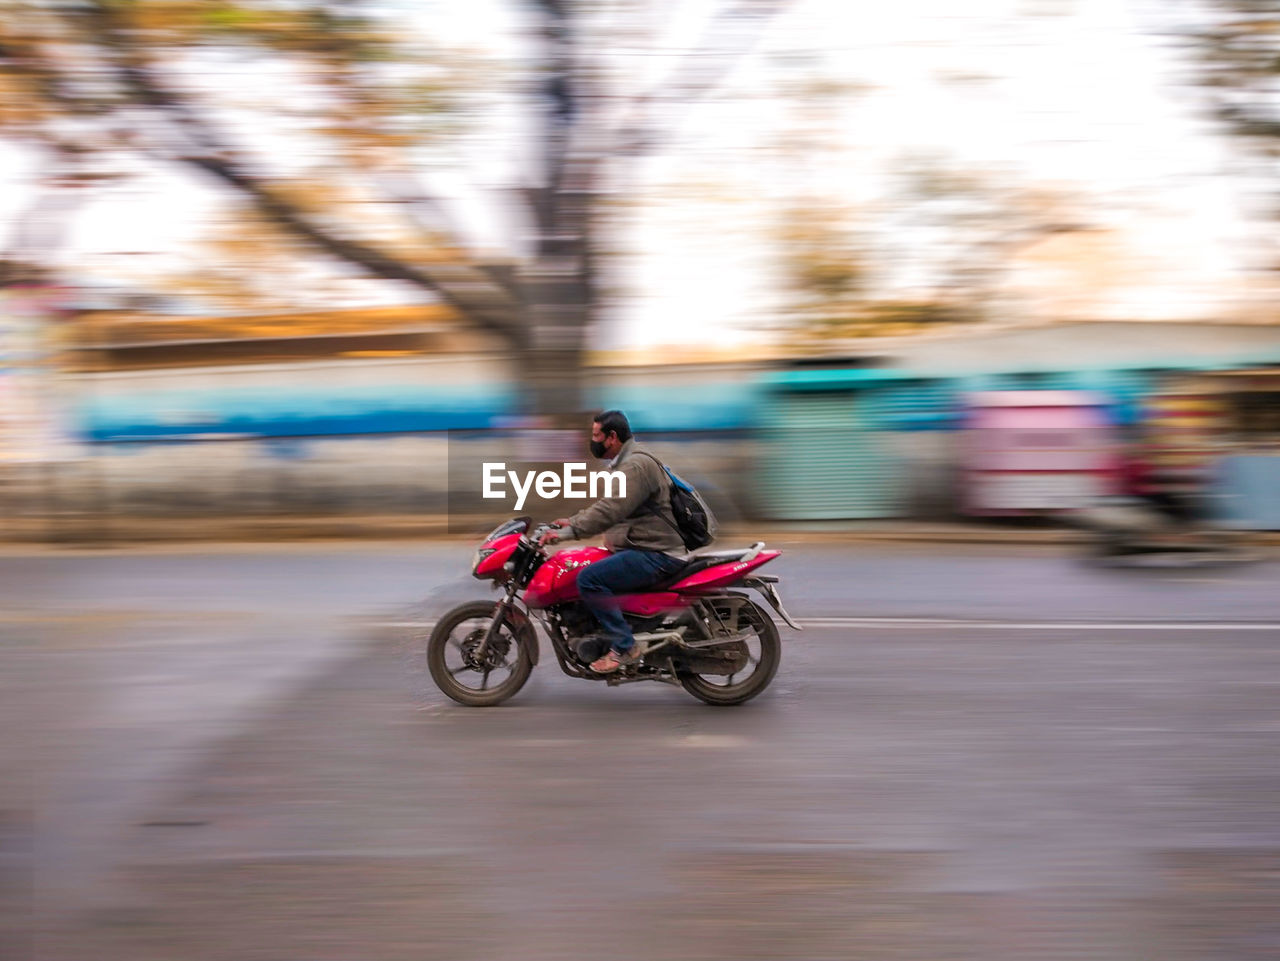 BLURRED MOTION OF MAN RIDING MOTORCYCLE ON STREET